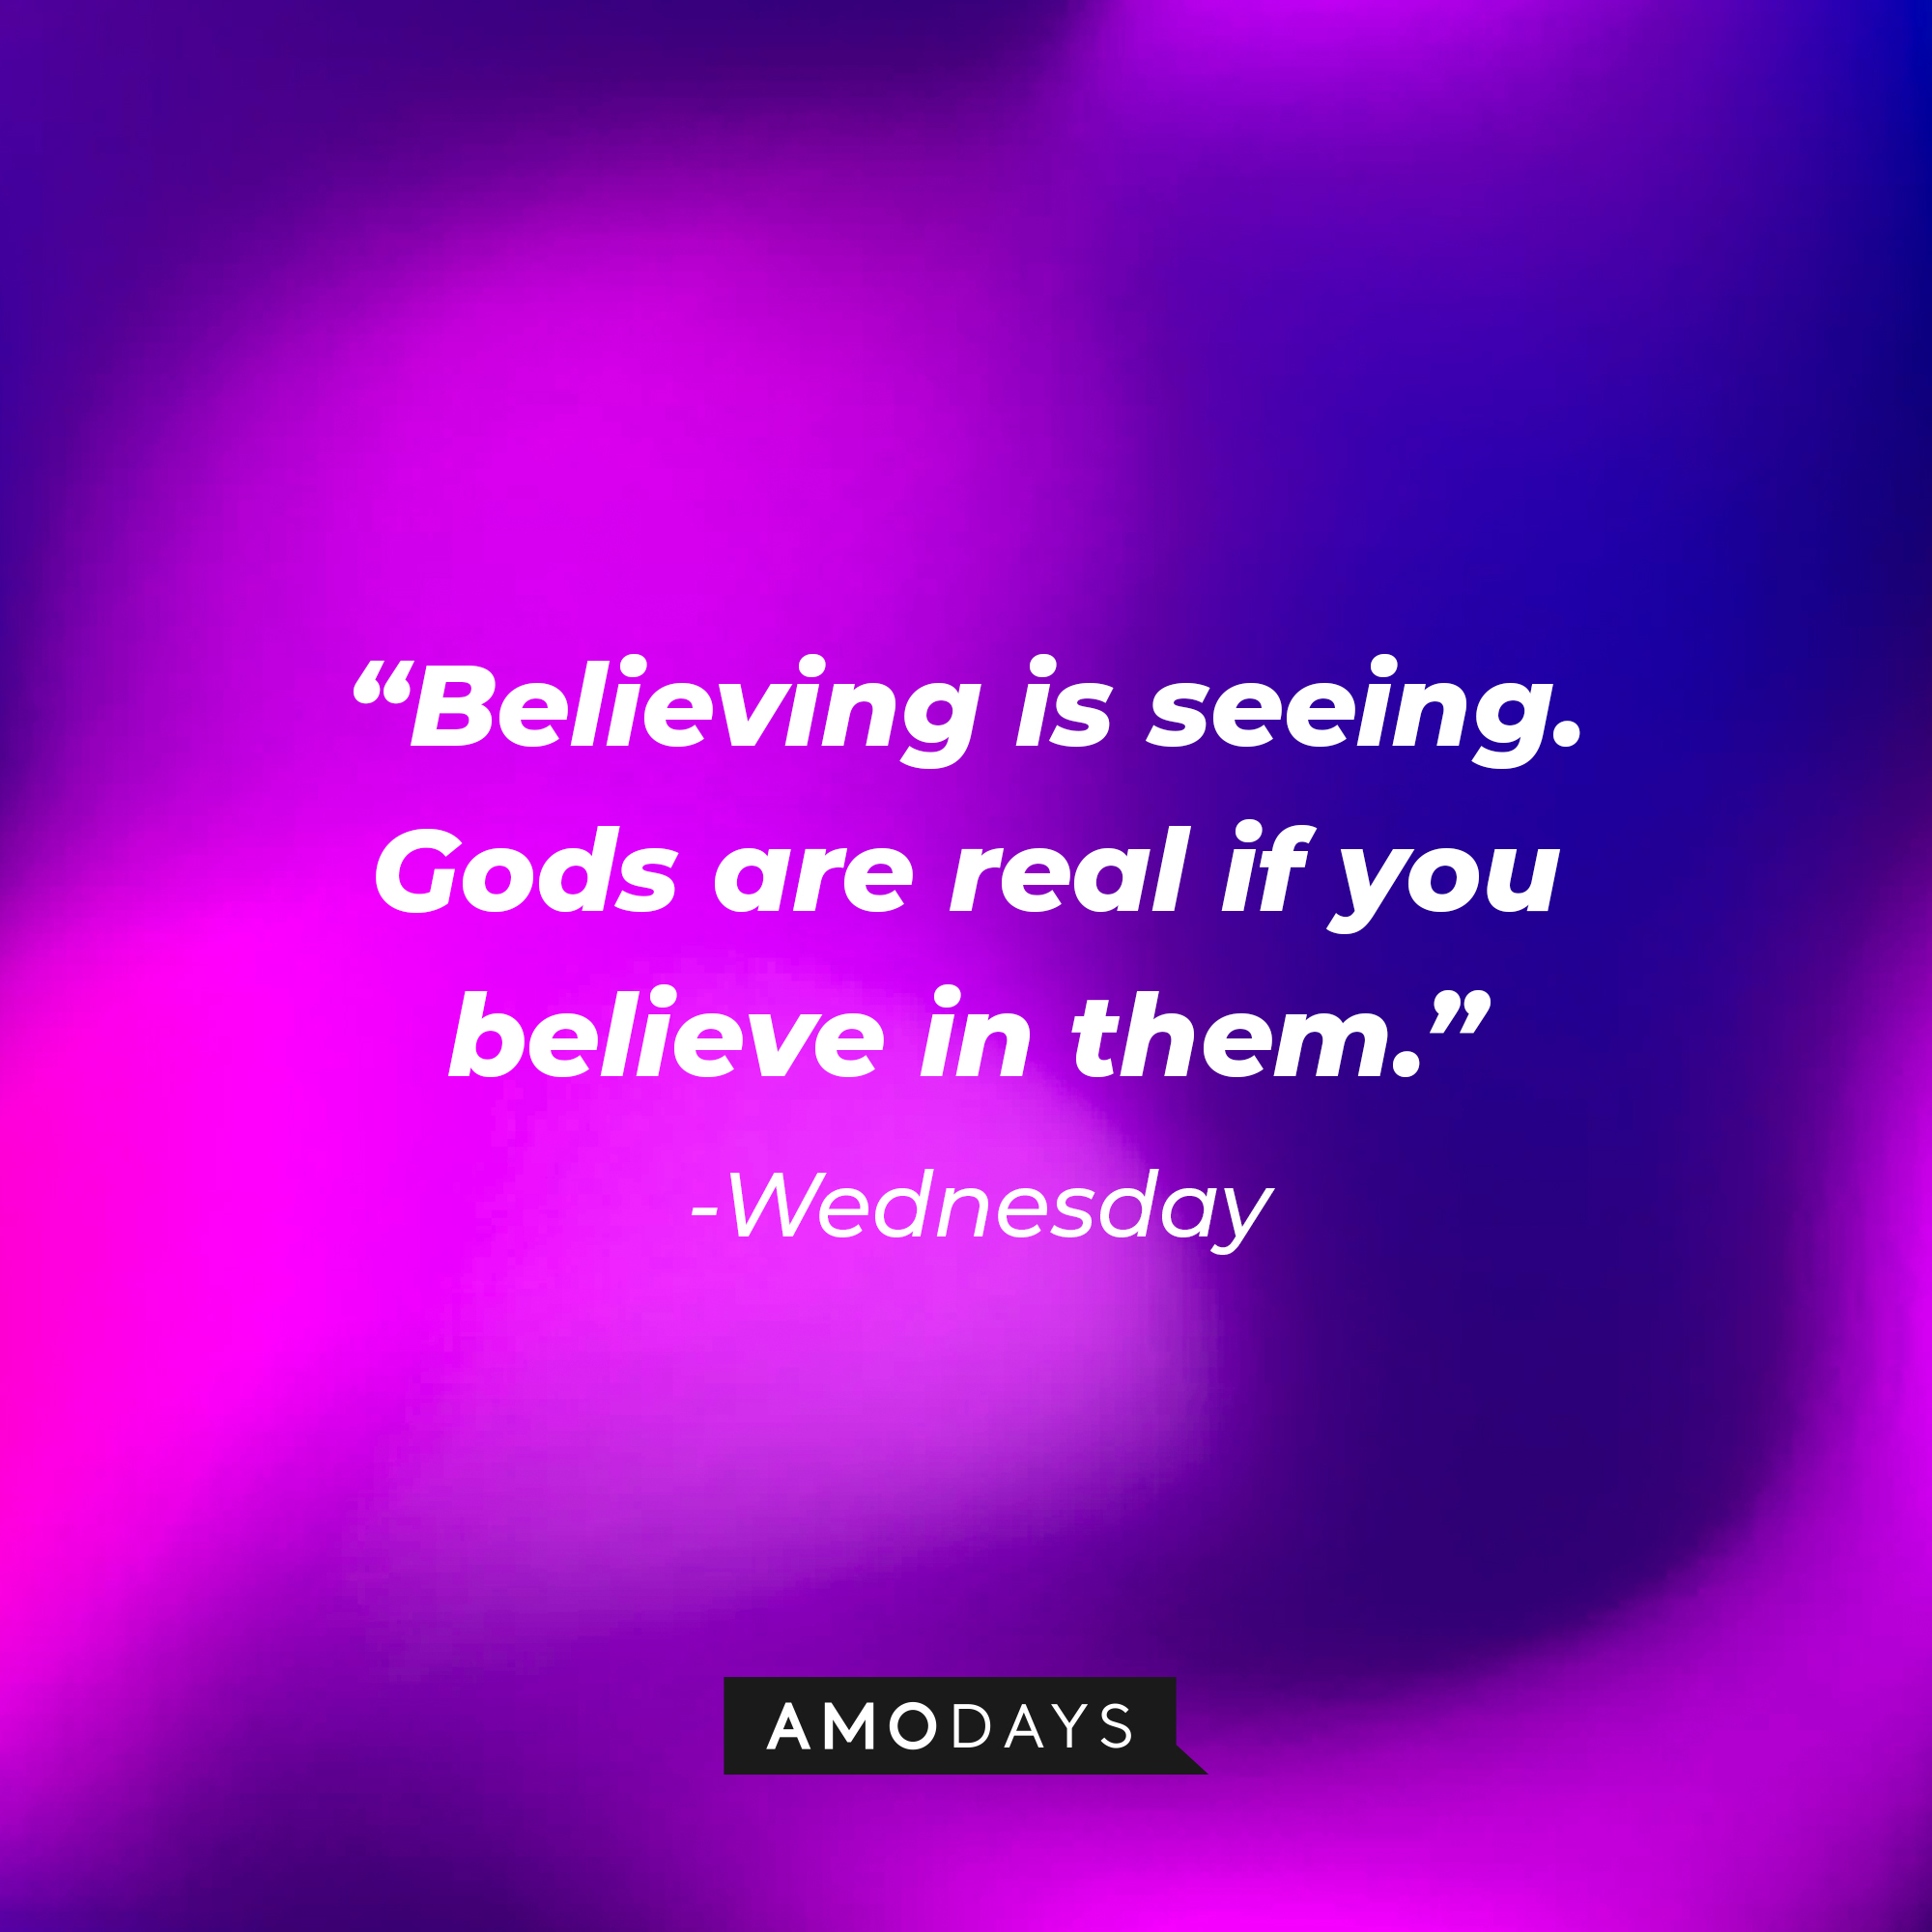 Wednesday's quote: "Believing is seeing. Gods are real if you believe in them." | Source: Amodays